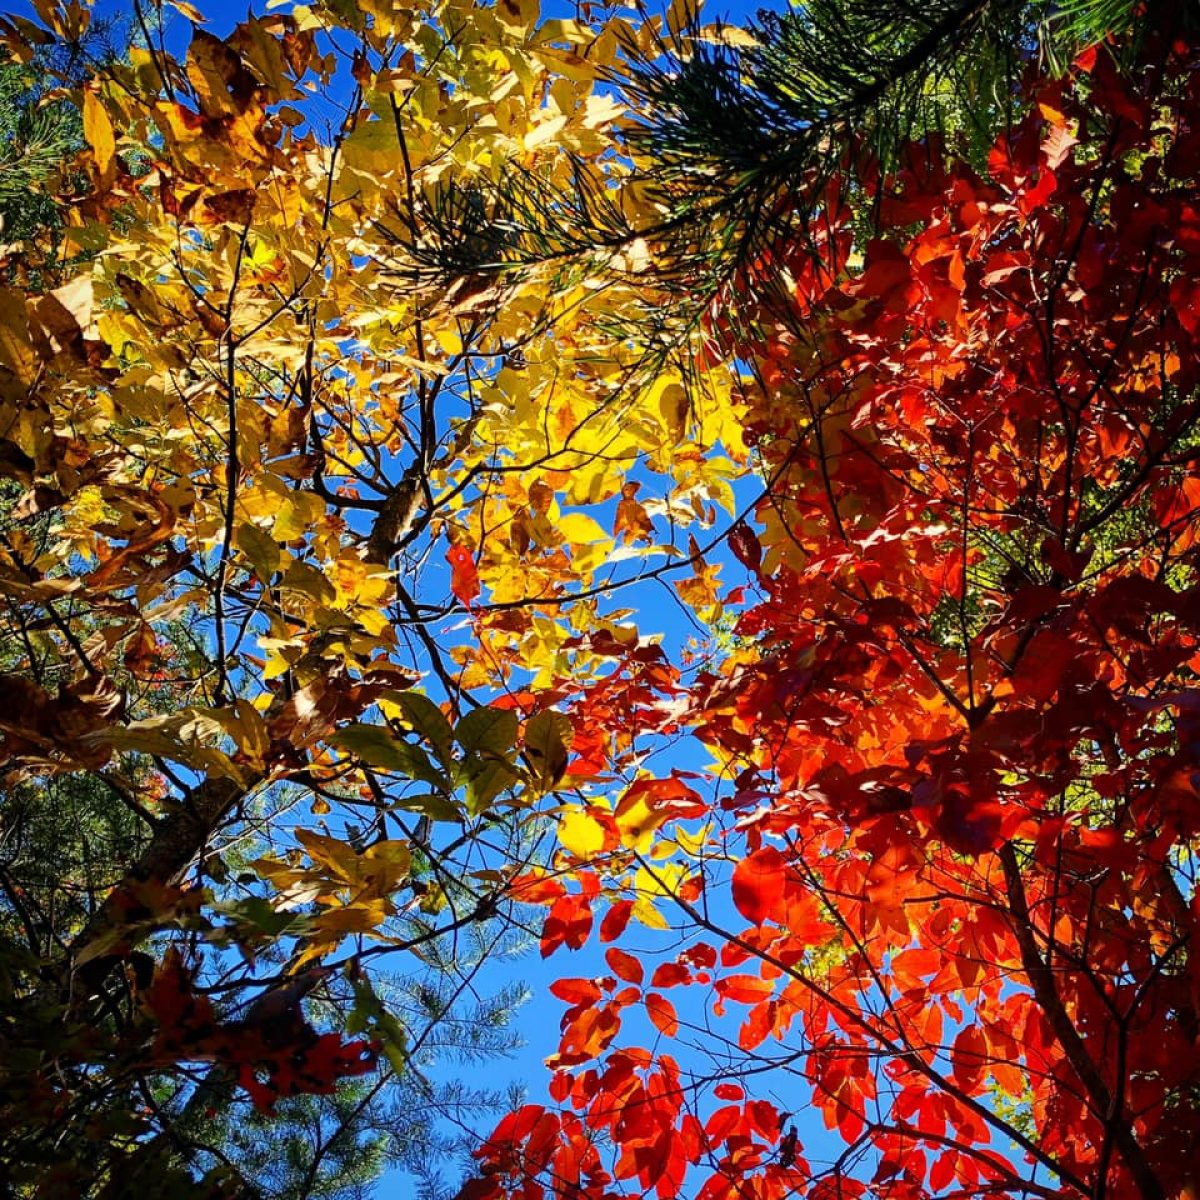 cluster of trees viewed from below showing fall colors